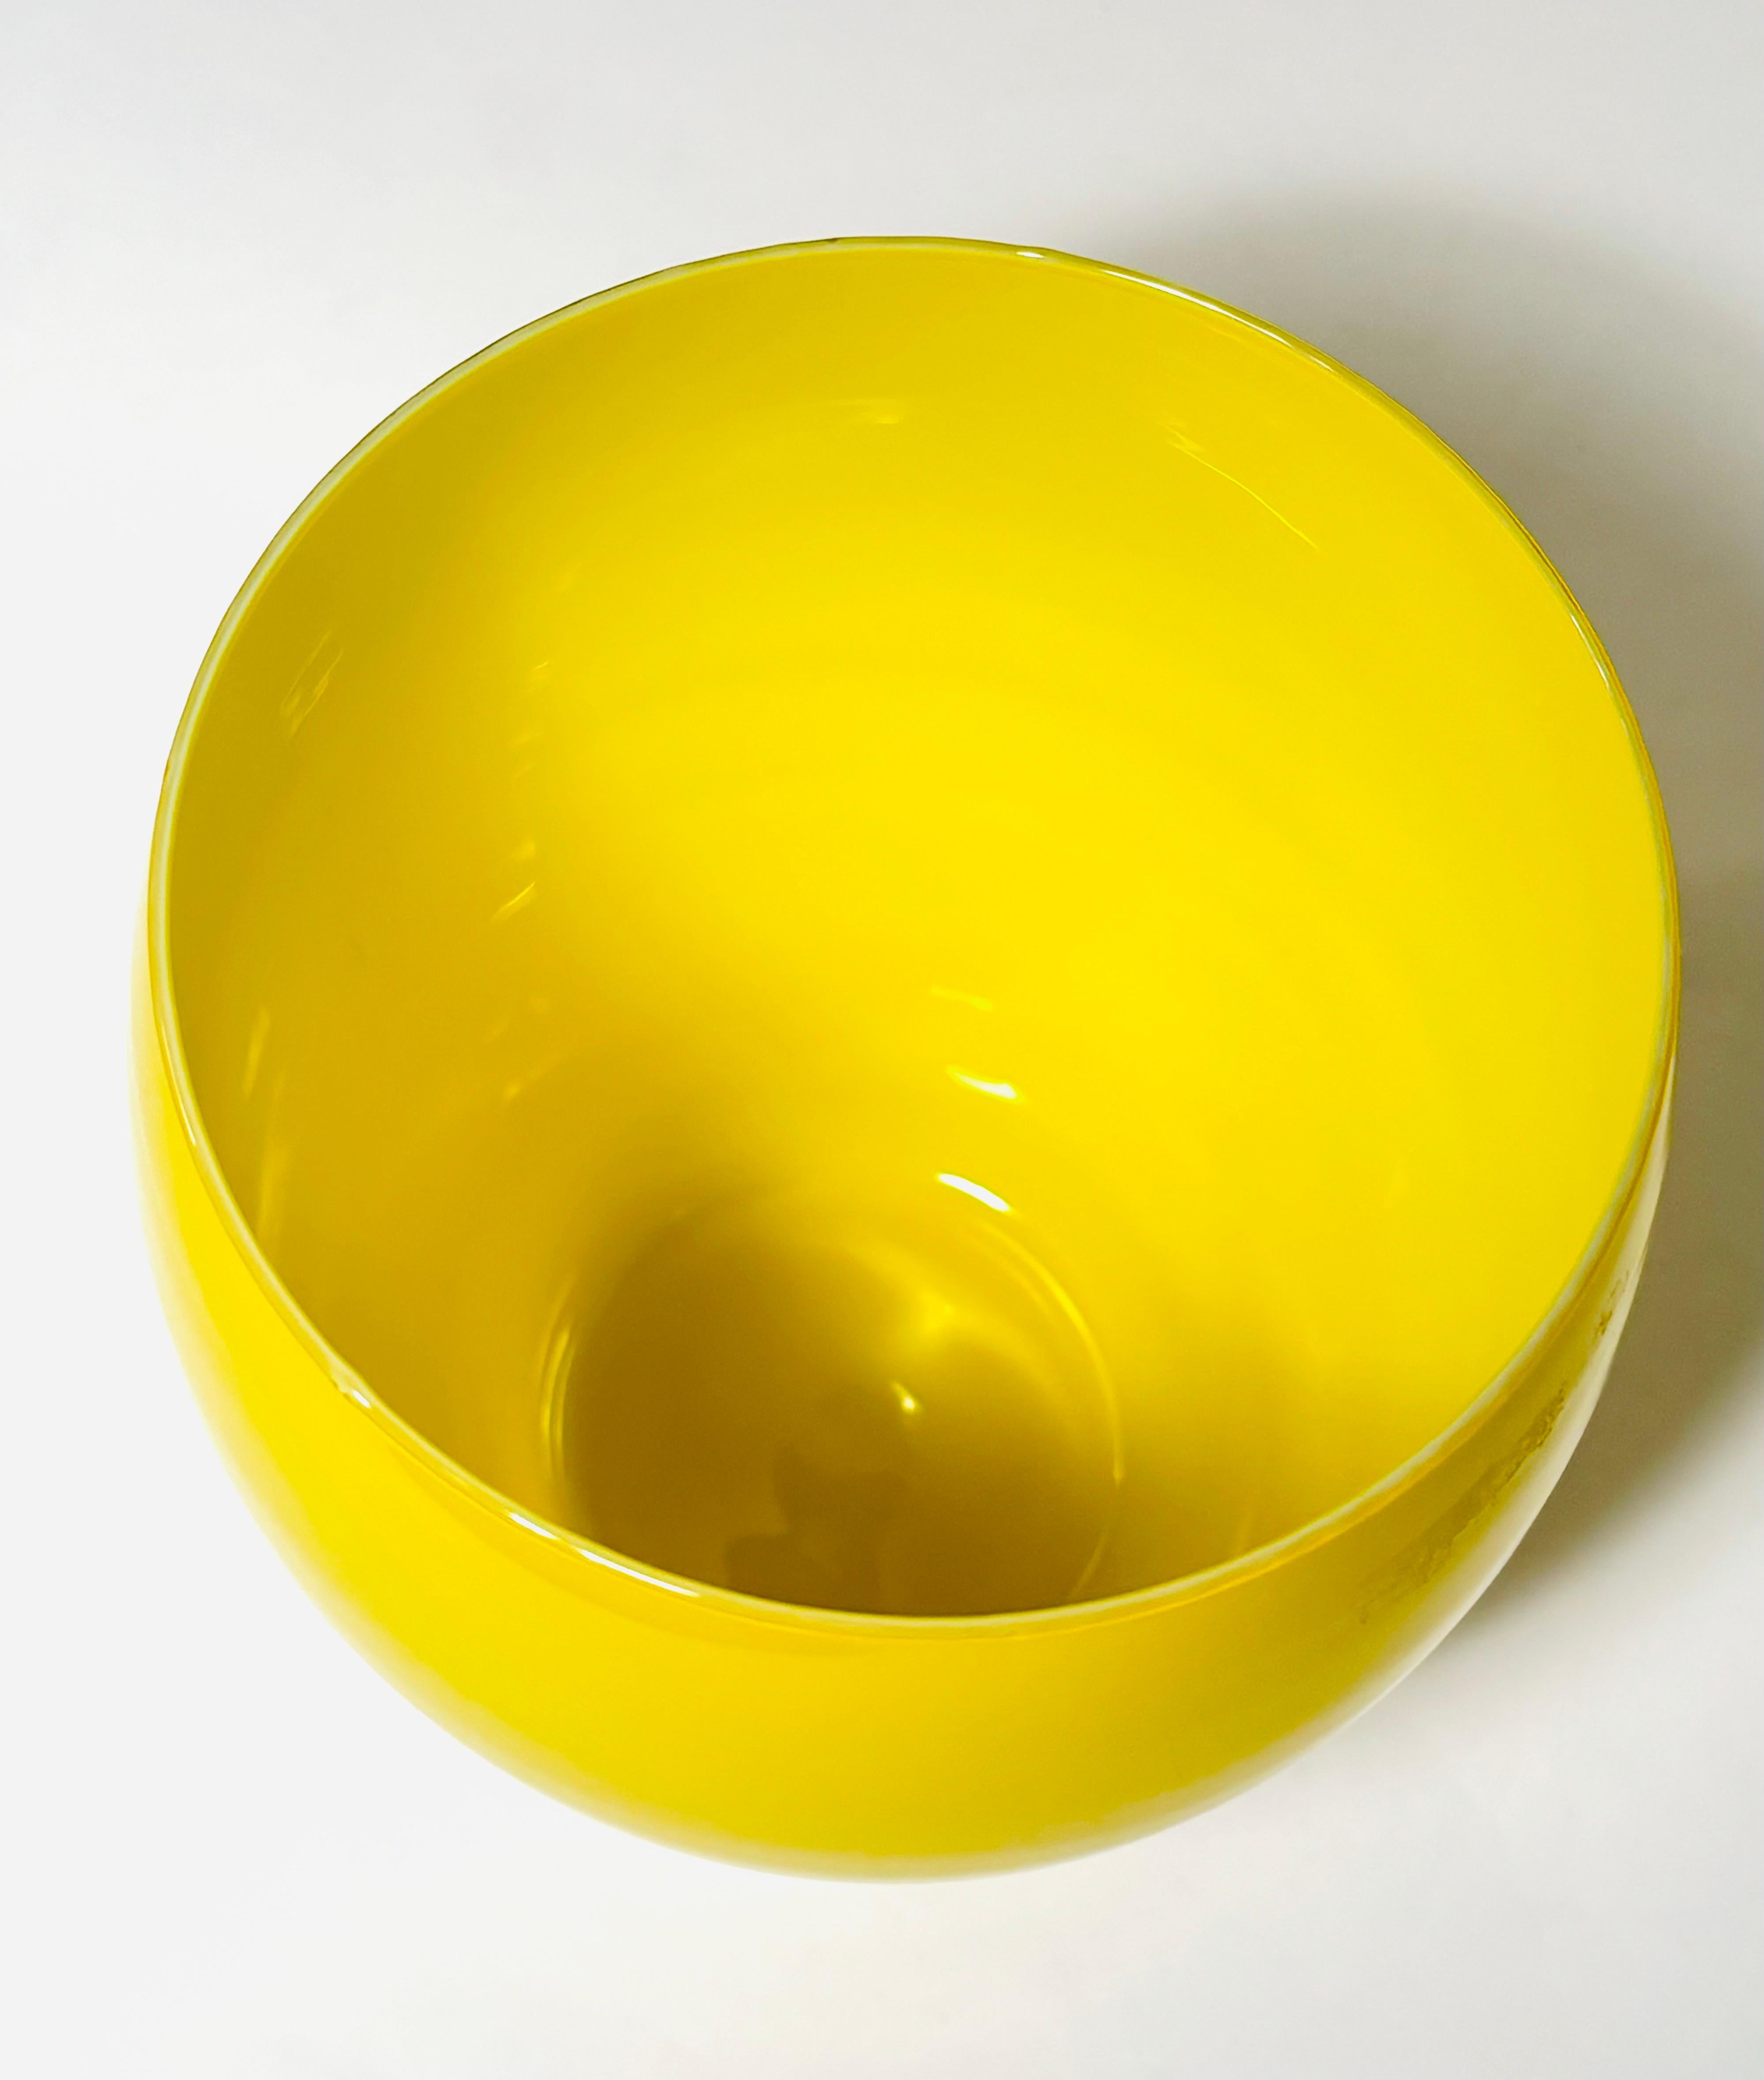 Mid-20th Century Vintage Italian Yellow Cased Glass Covered Vase or Urn Circa 1960's For Sale